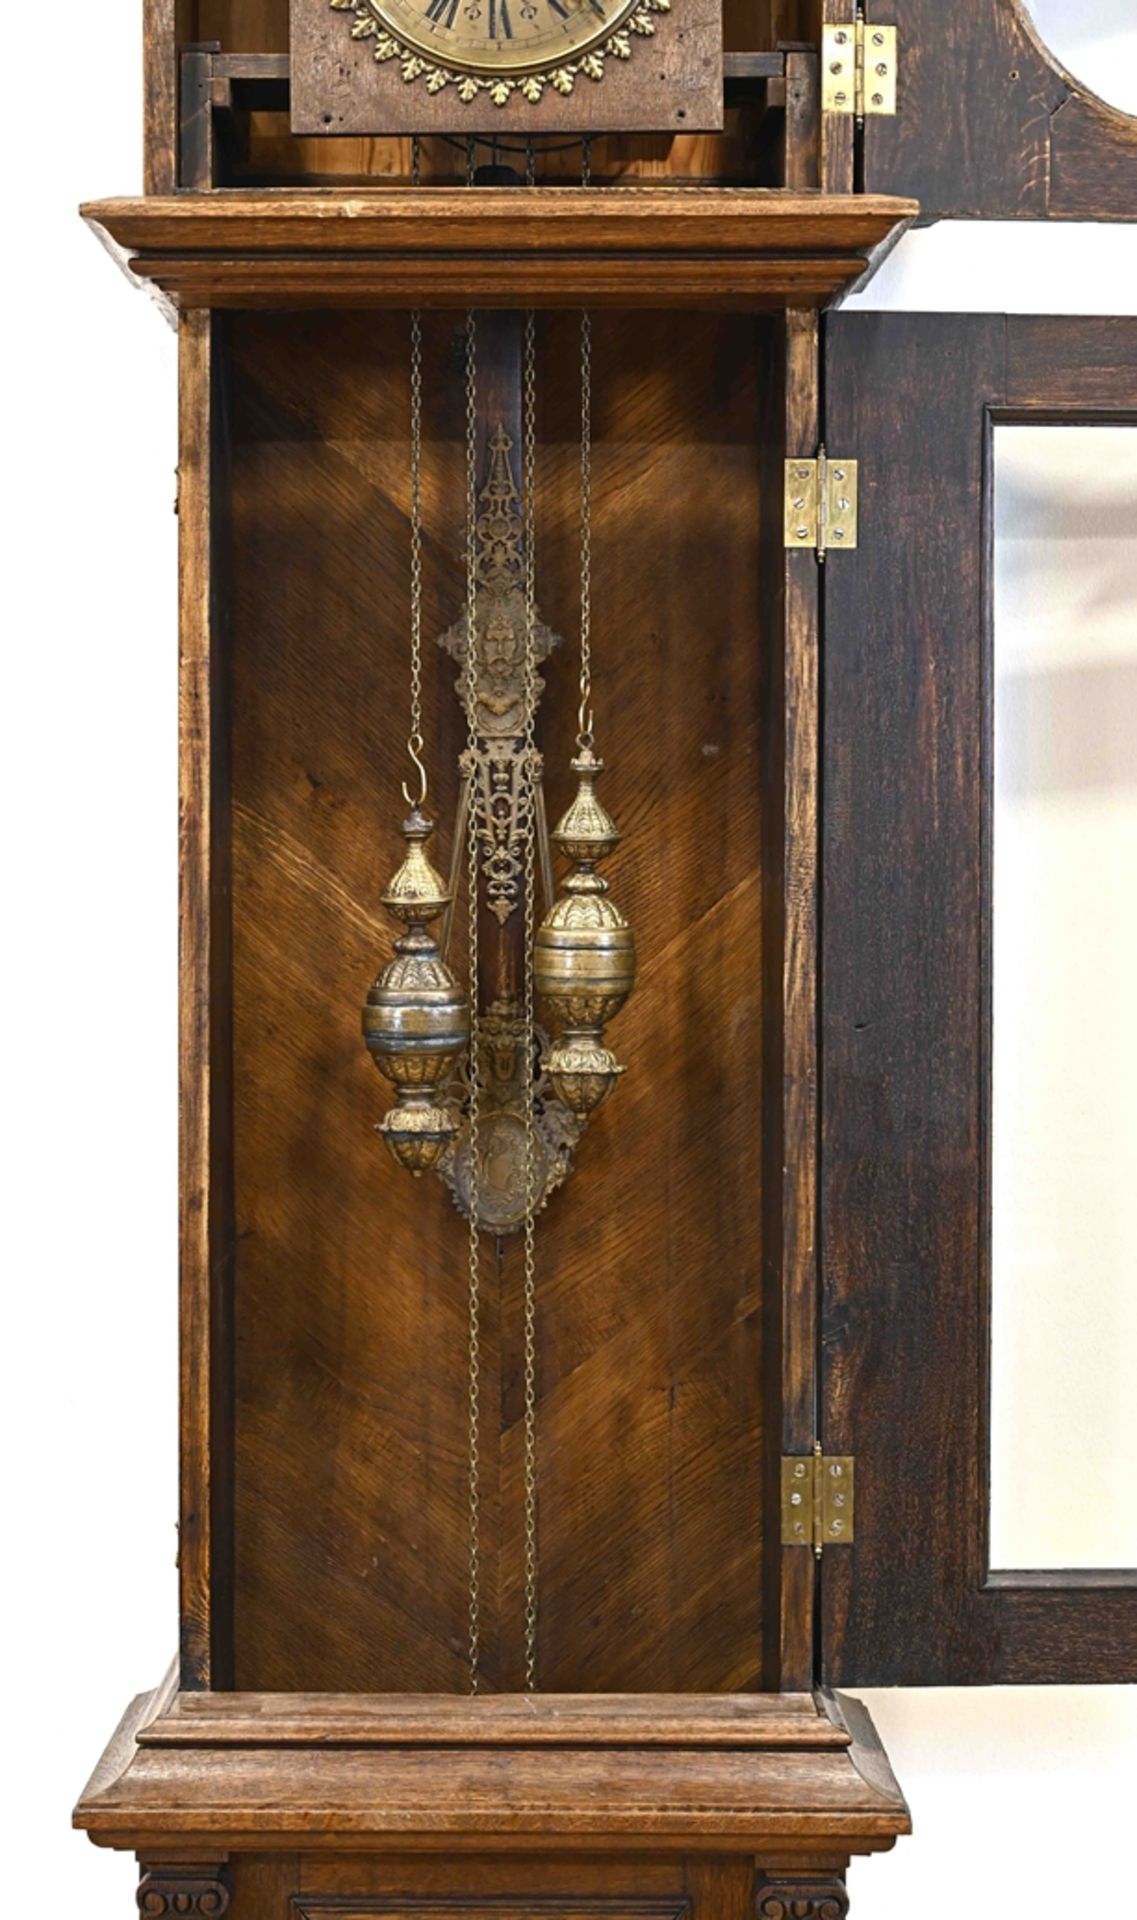 Grand grandfather clock from the Wilhelminian period around 1880/90, solid oak and veneered. Impres - Image 3 of 10